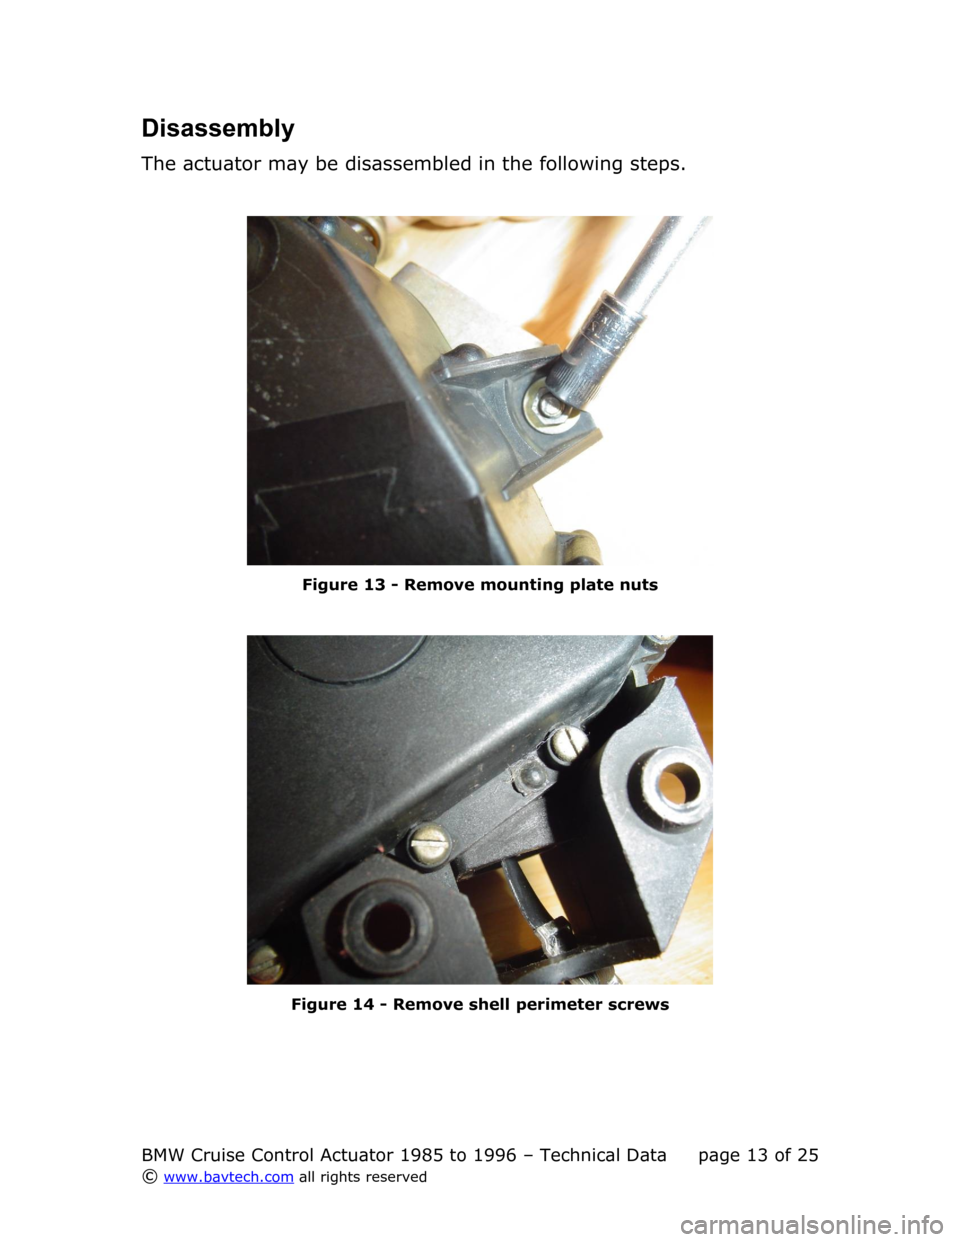 BMW 5 SERIES 1995 E34 Cruise Control Acutator Disassembly
The actuator may be disassembled in the following steps.
Figure  13  - Remove mounting plate nuts
Figure  14  - Remove shell perimeter screws
BMW Cruise Control Actuator 1985 to 1996 – T